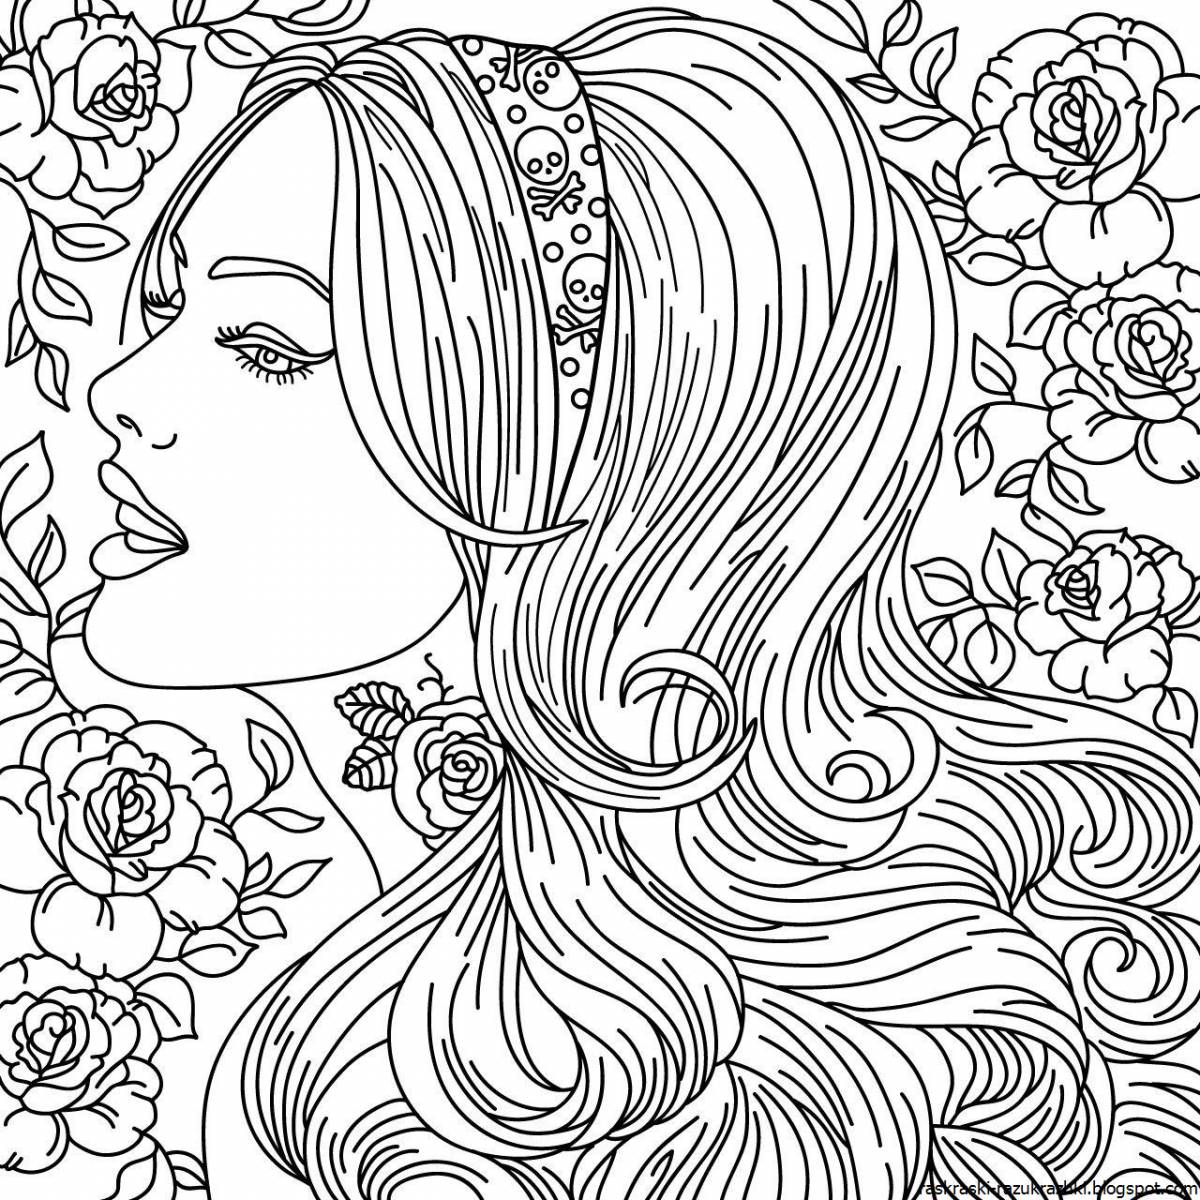 Serene coloring for girls 10 years old